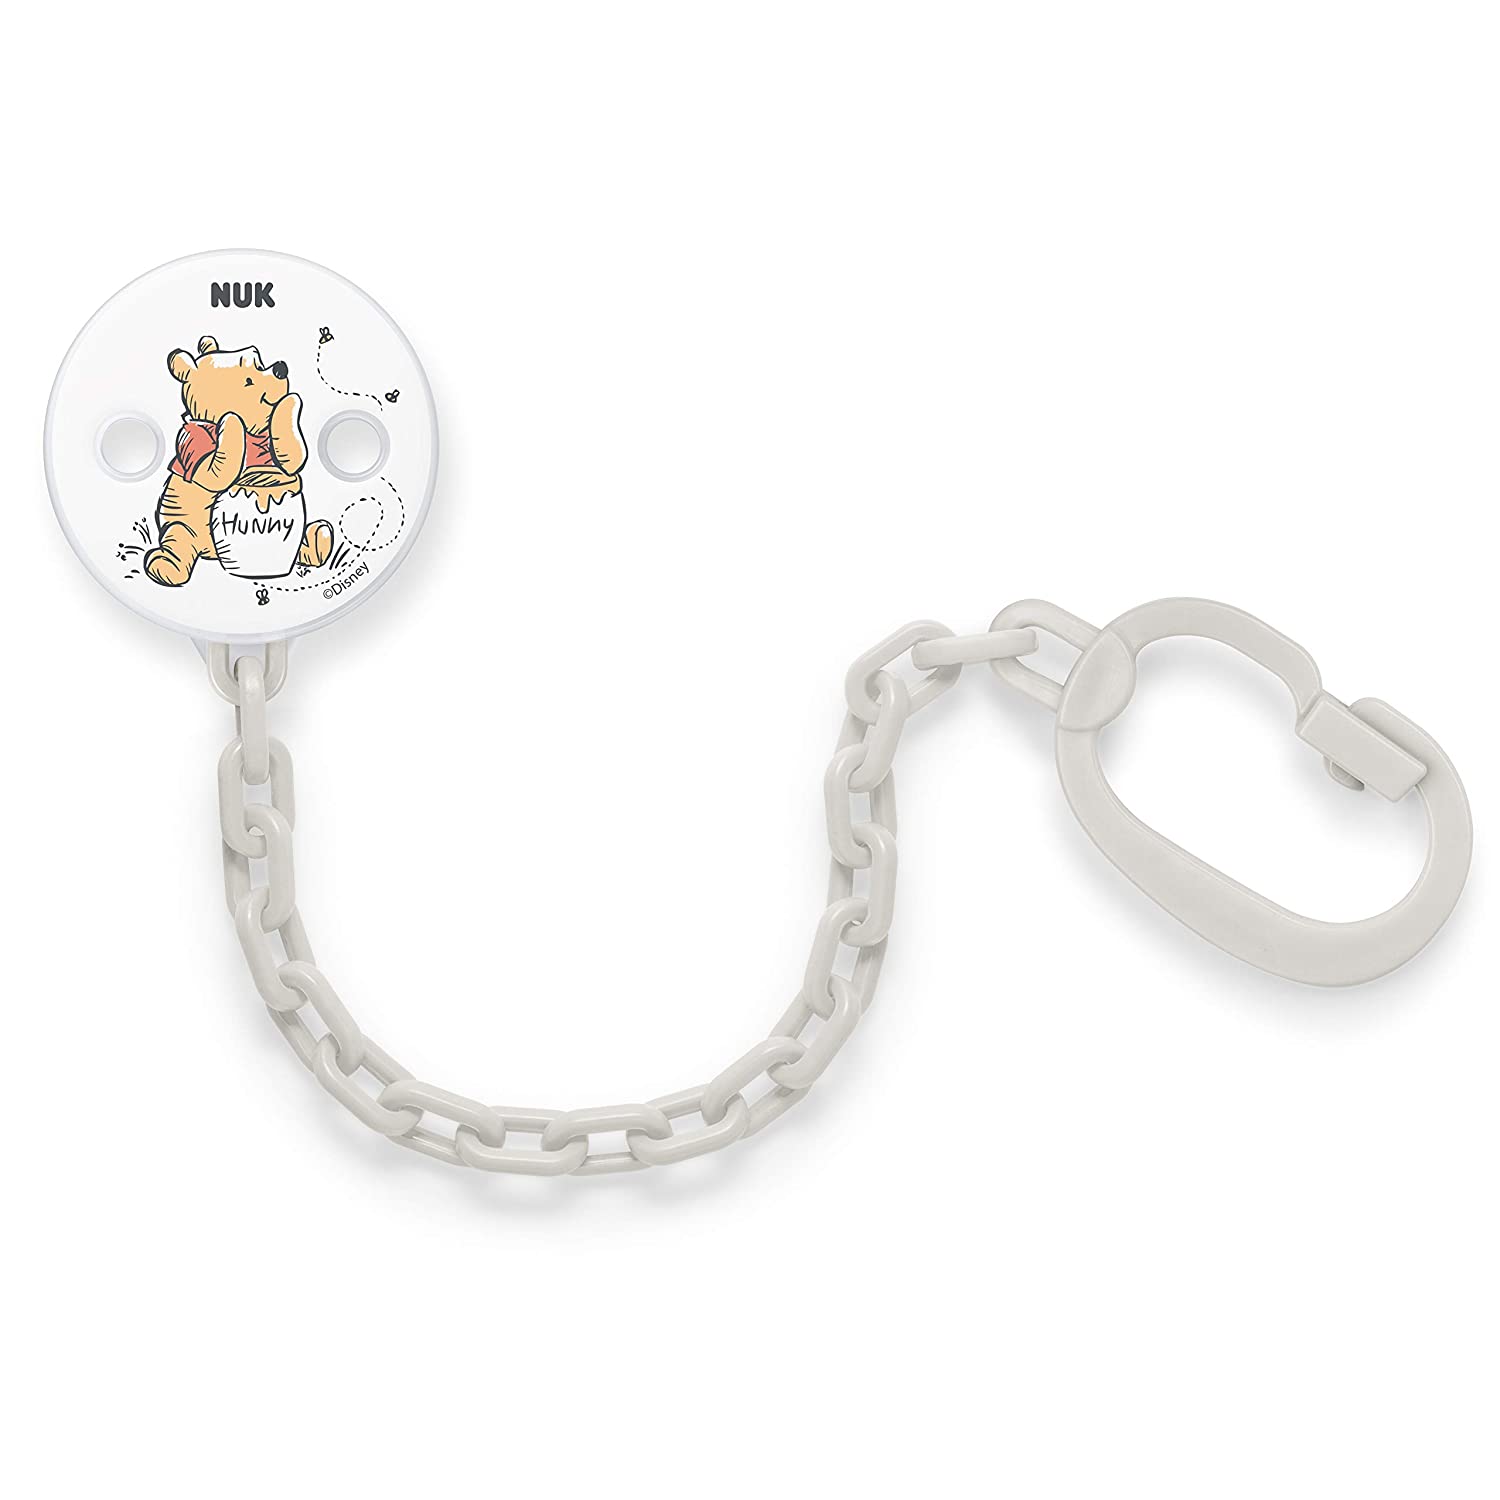 Nuk Disney Winnie the Pooh Dummy Chain with Clip for Securely Attaching the Dummy to Baby\'s Clothes White or Grey (Colour Cannot be Selected)